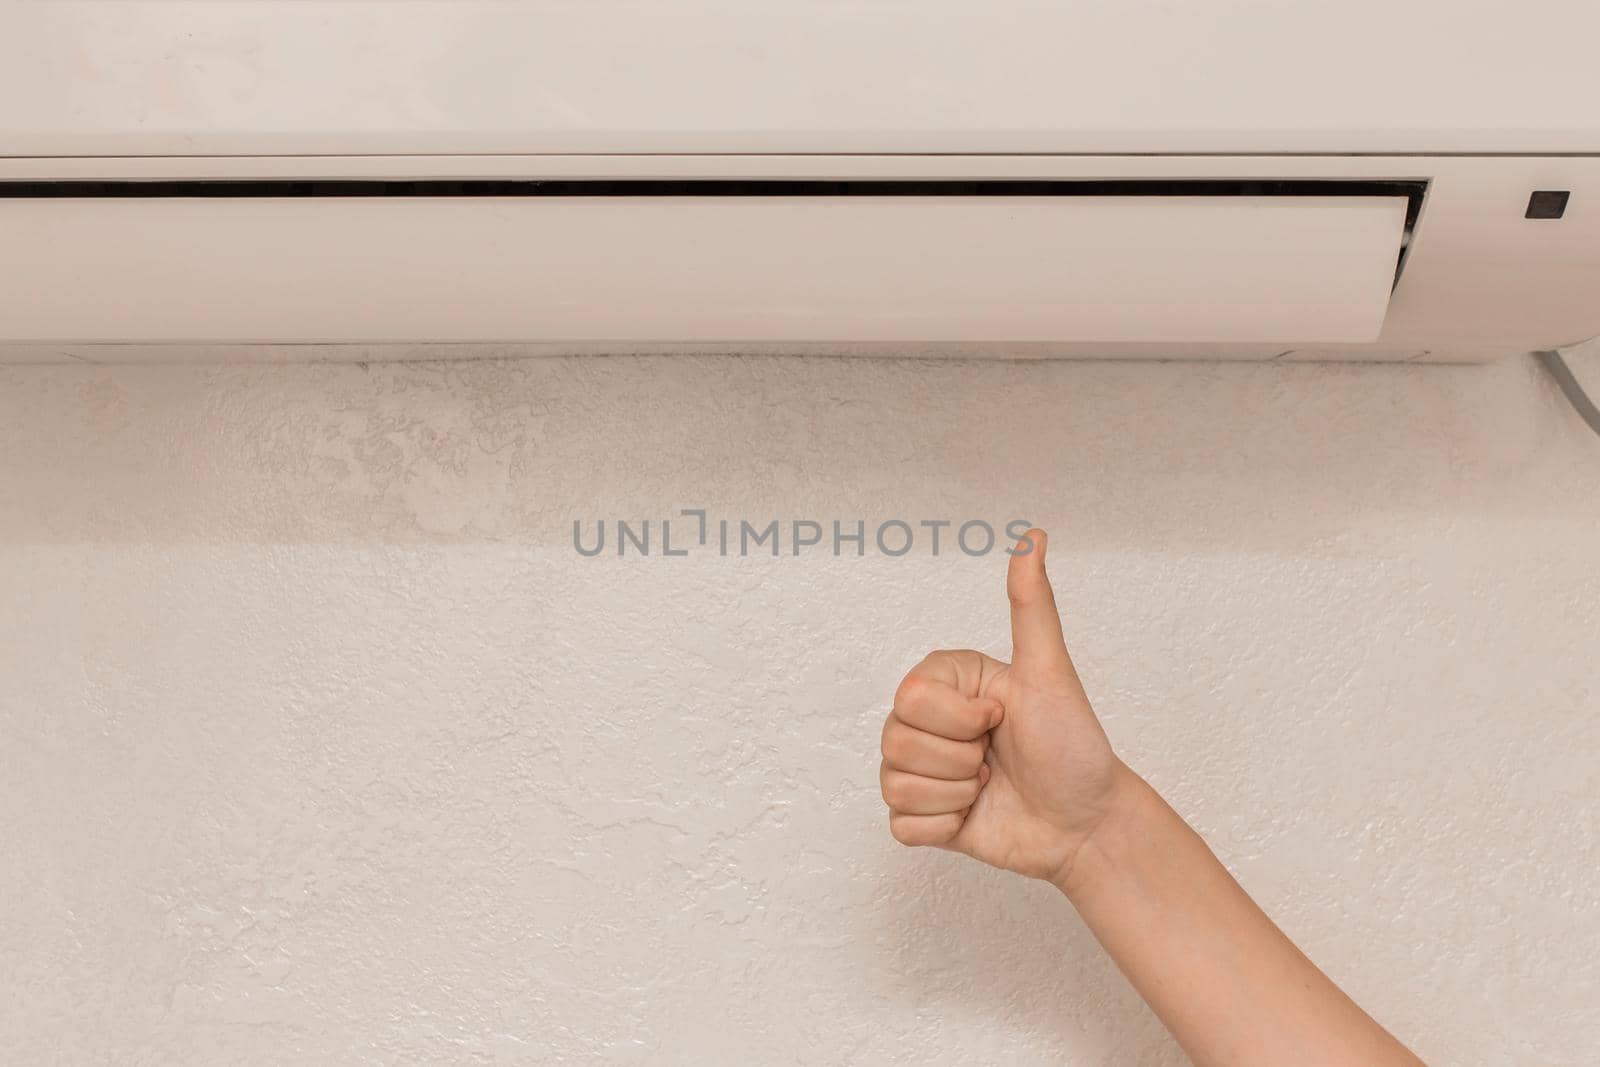 The girl's hand shows the class thumbs up under air conditioner on the wall in the room background.